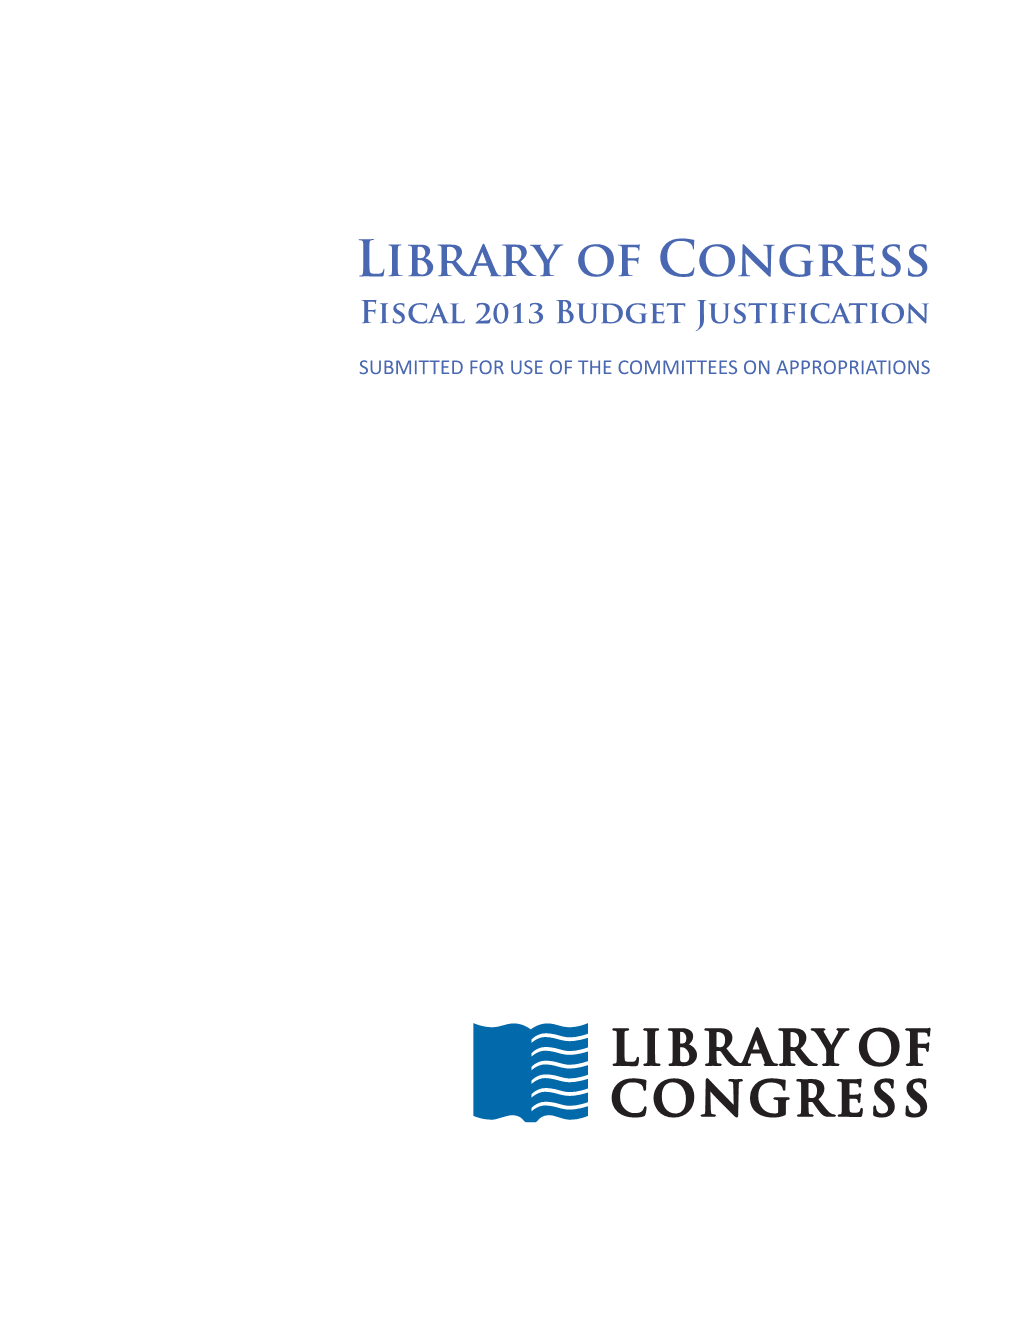 Library of Congress Fiscal 2013 Budget Justification